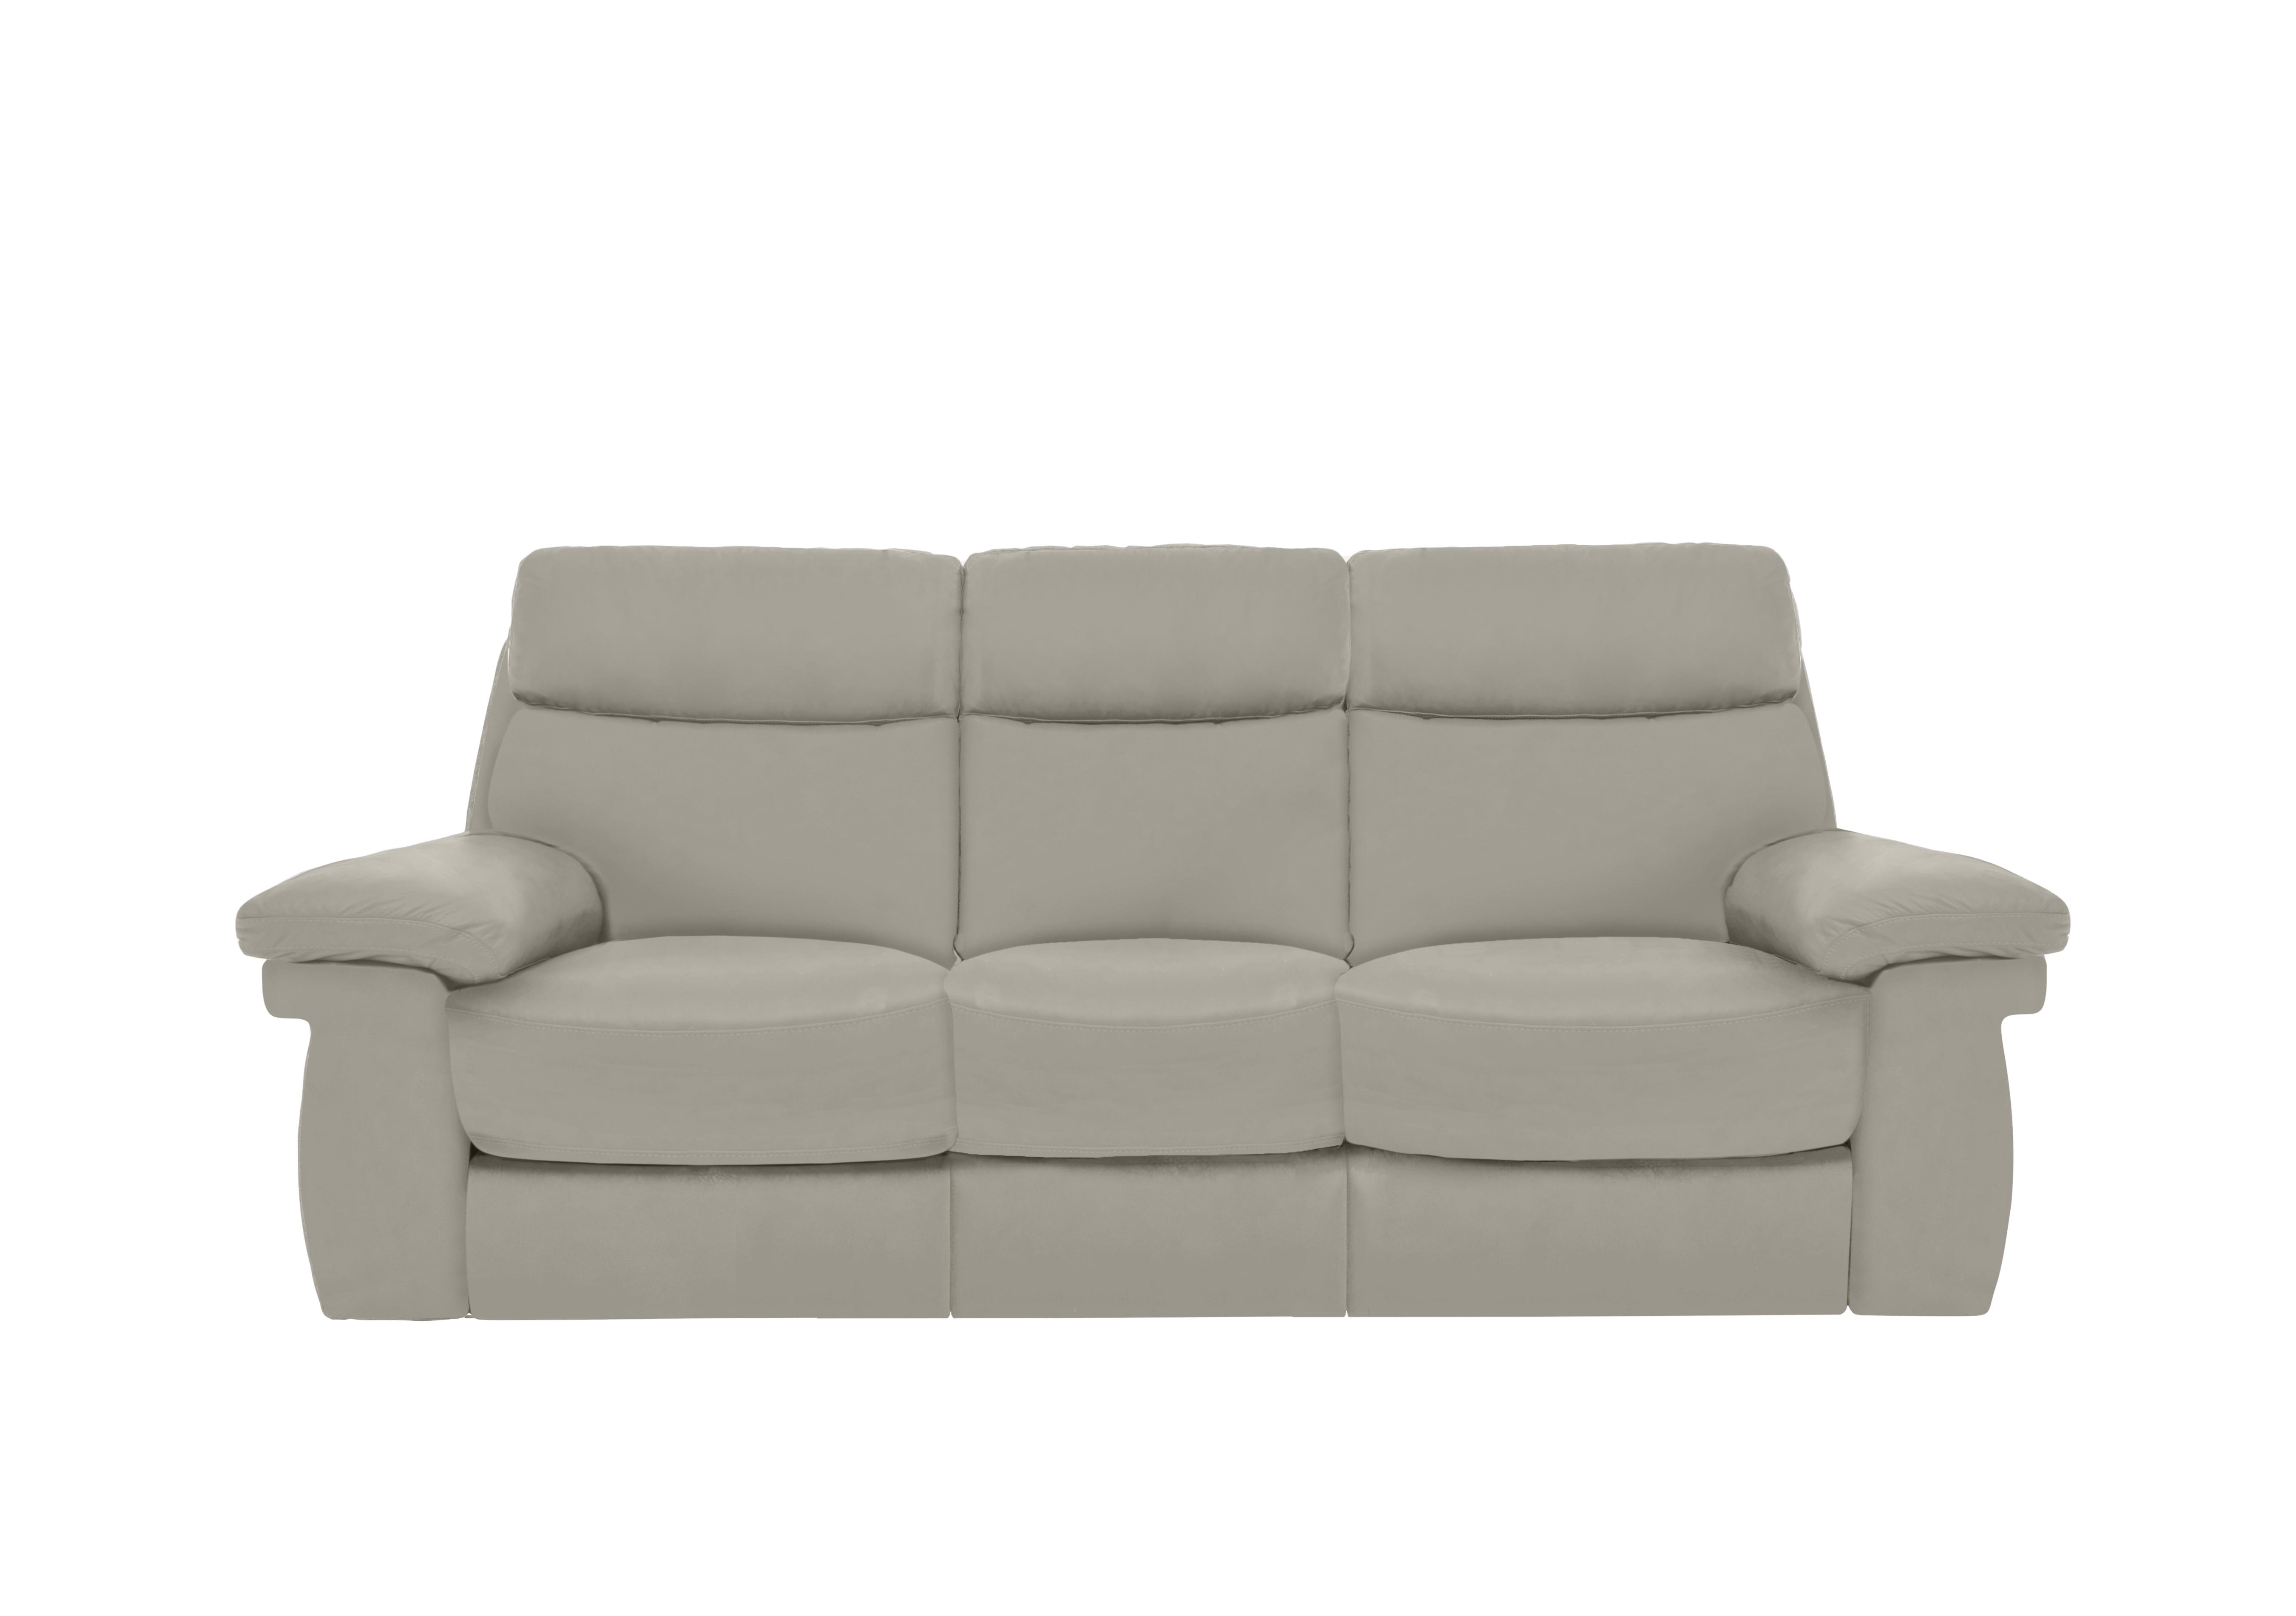 Serene 3 Seater Leather Power Recliner Sofa with Power Headrests and Power Lumbar in Bx-251e Grey on Furniture Village